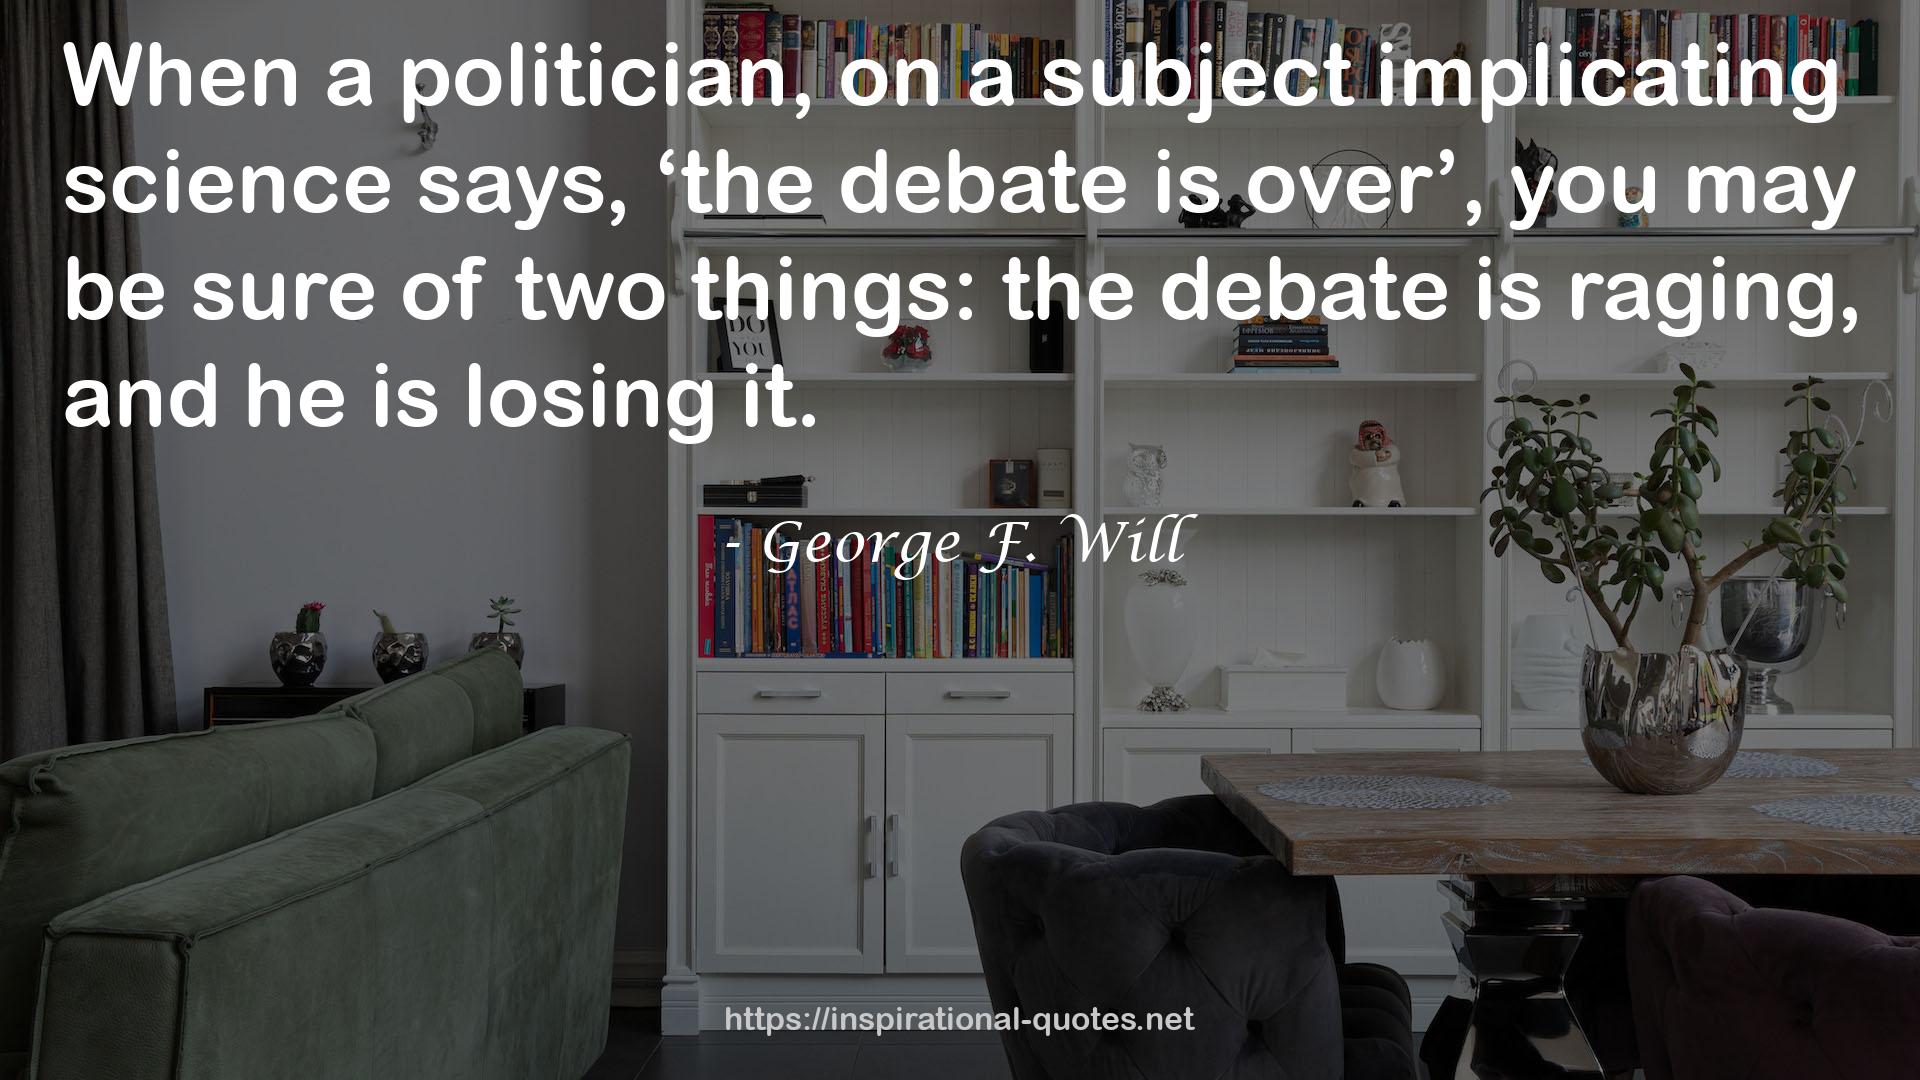 George F. Will QUOTES